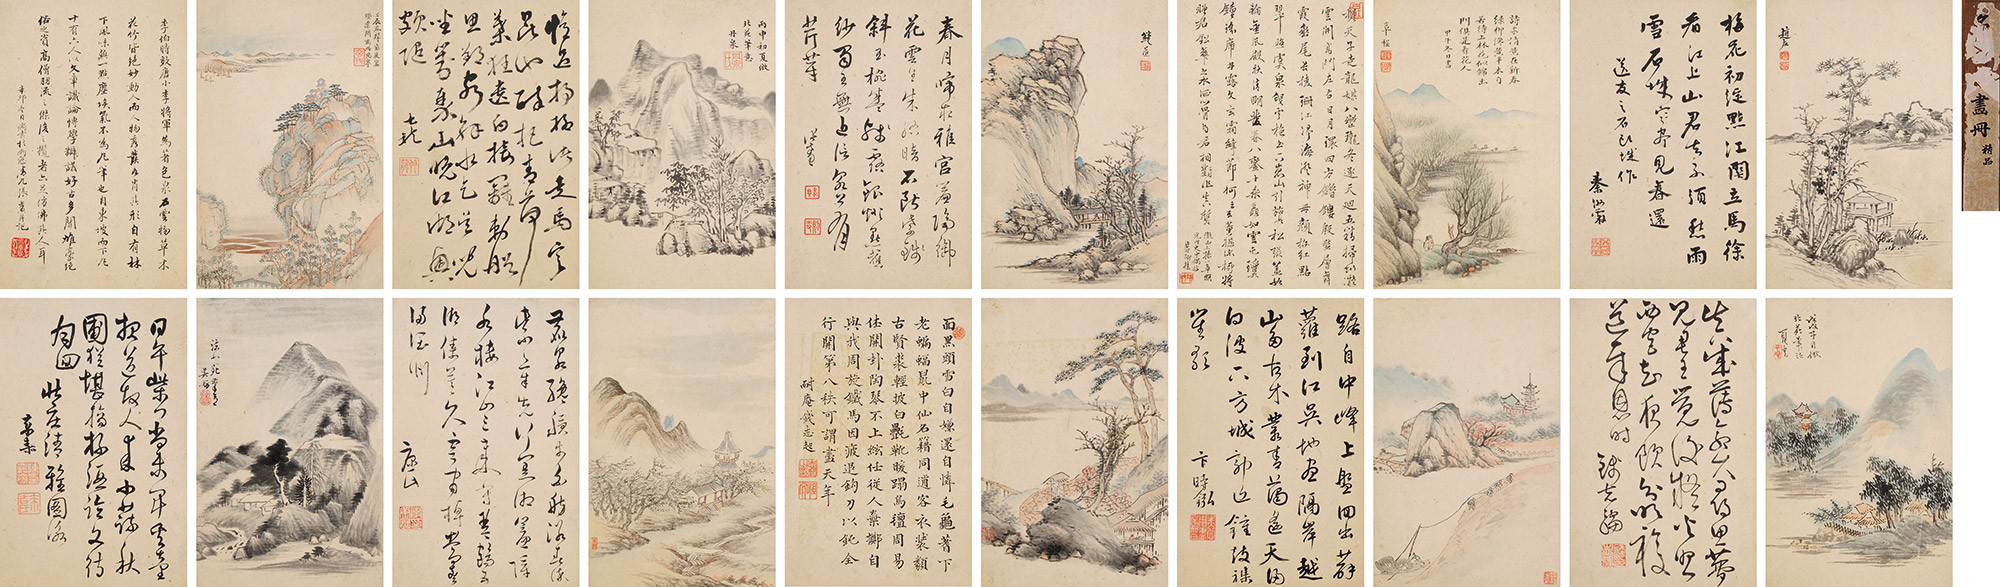 short works of various famous by ming dynasty